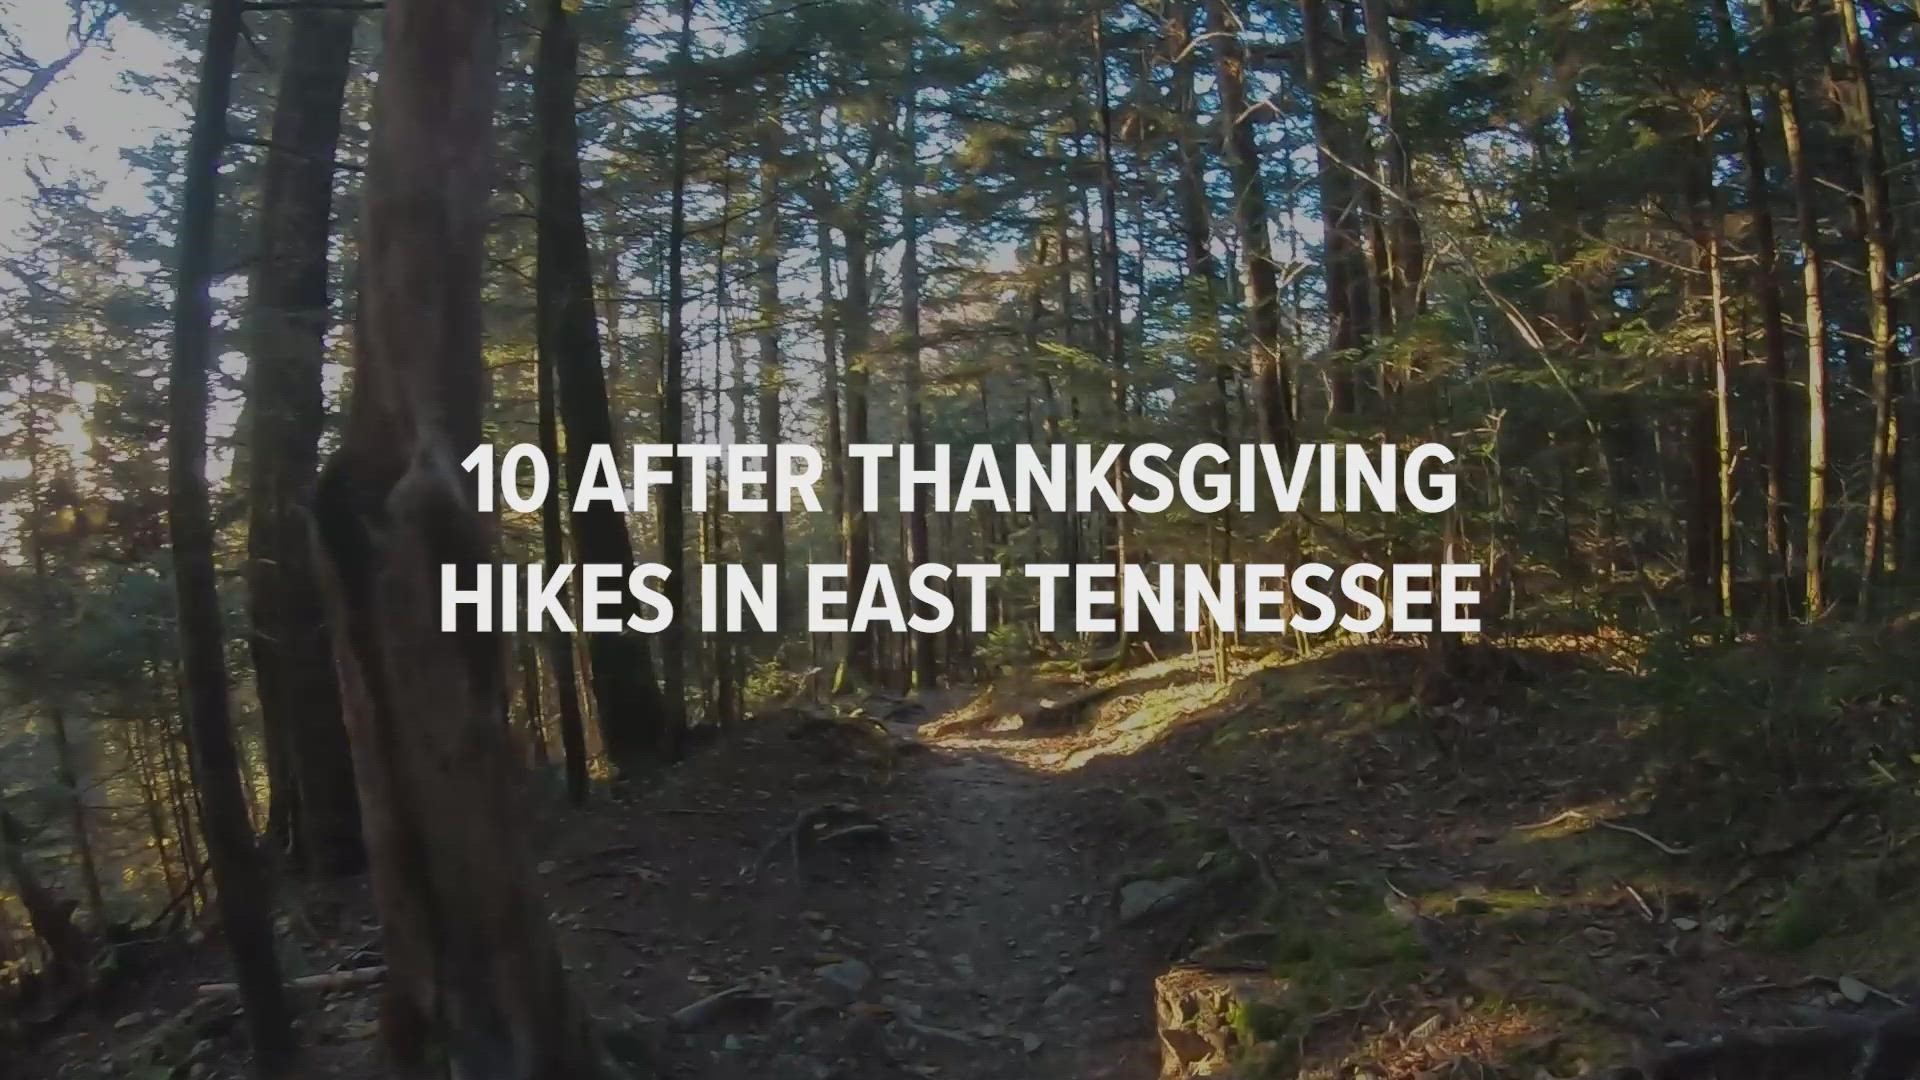 Here are 10 trails and treks you can try with the whole family in the Great Smoky Mountains and all over East Tennessee.